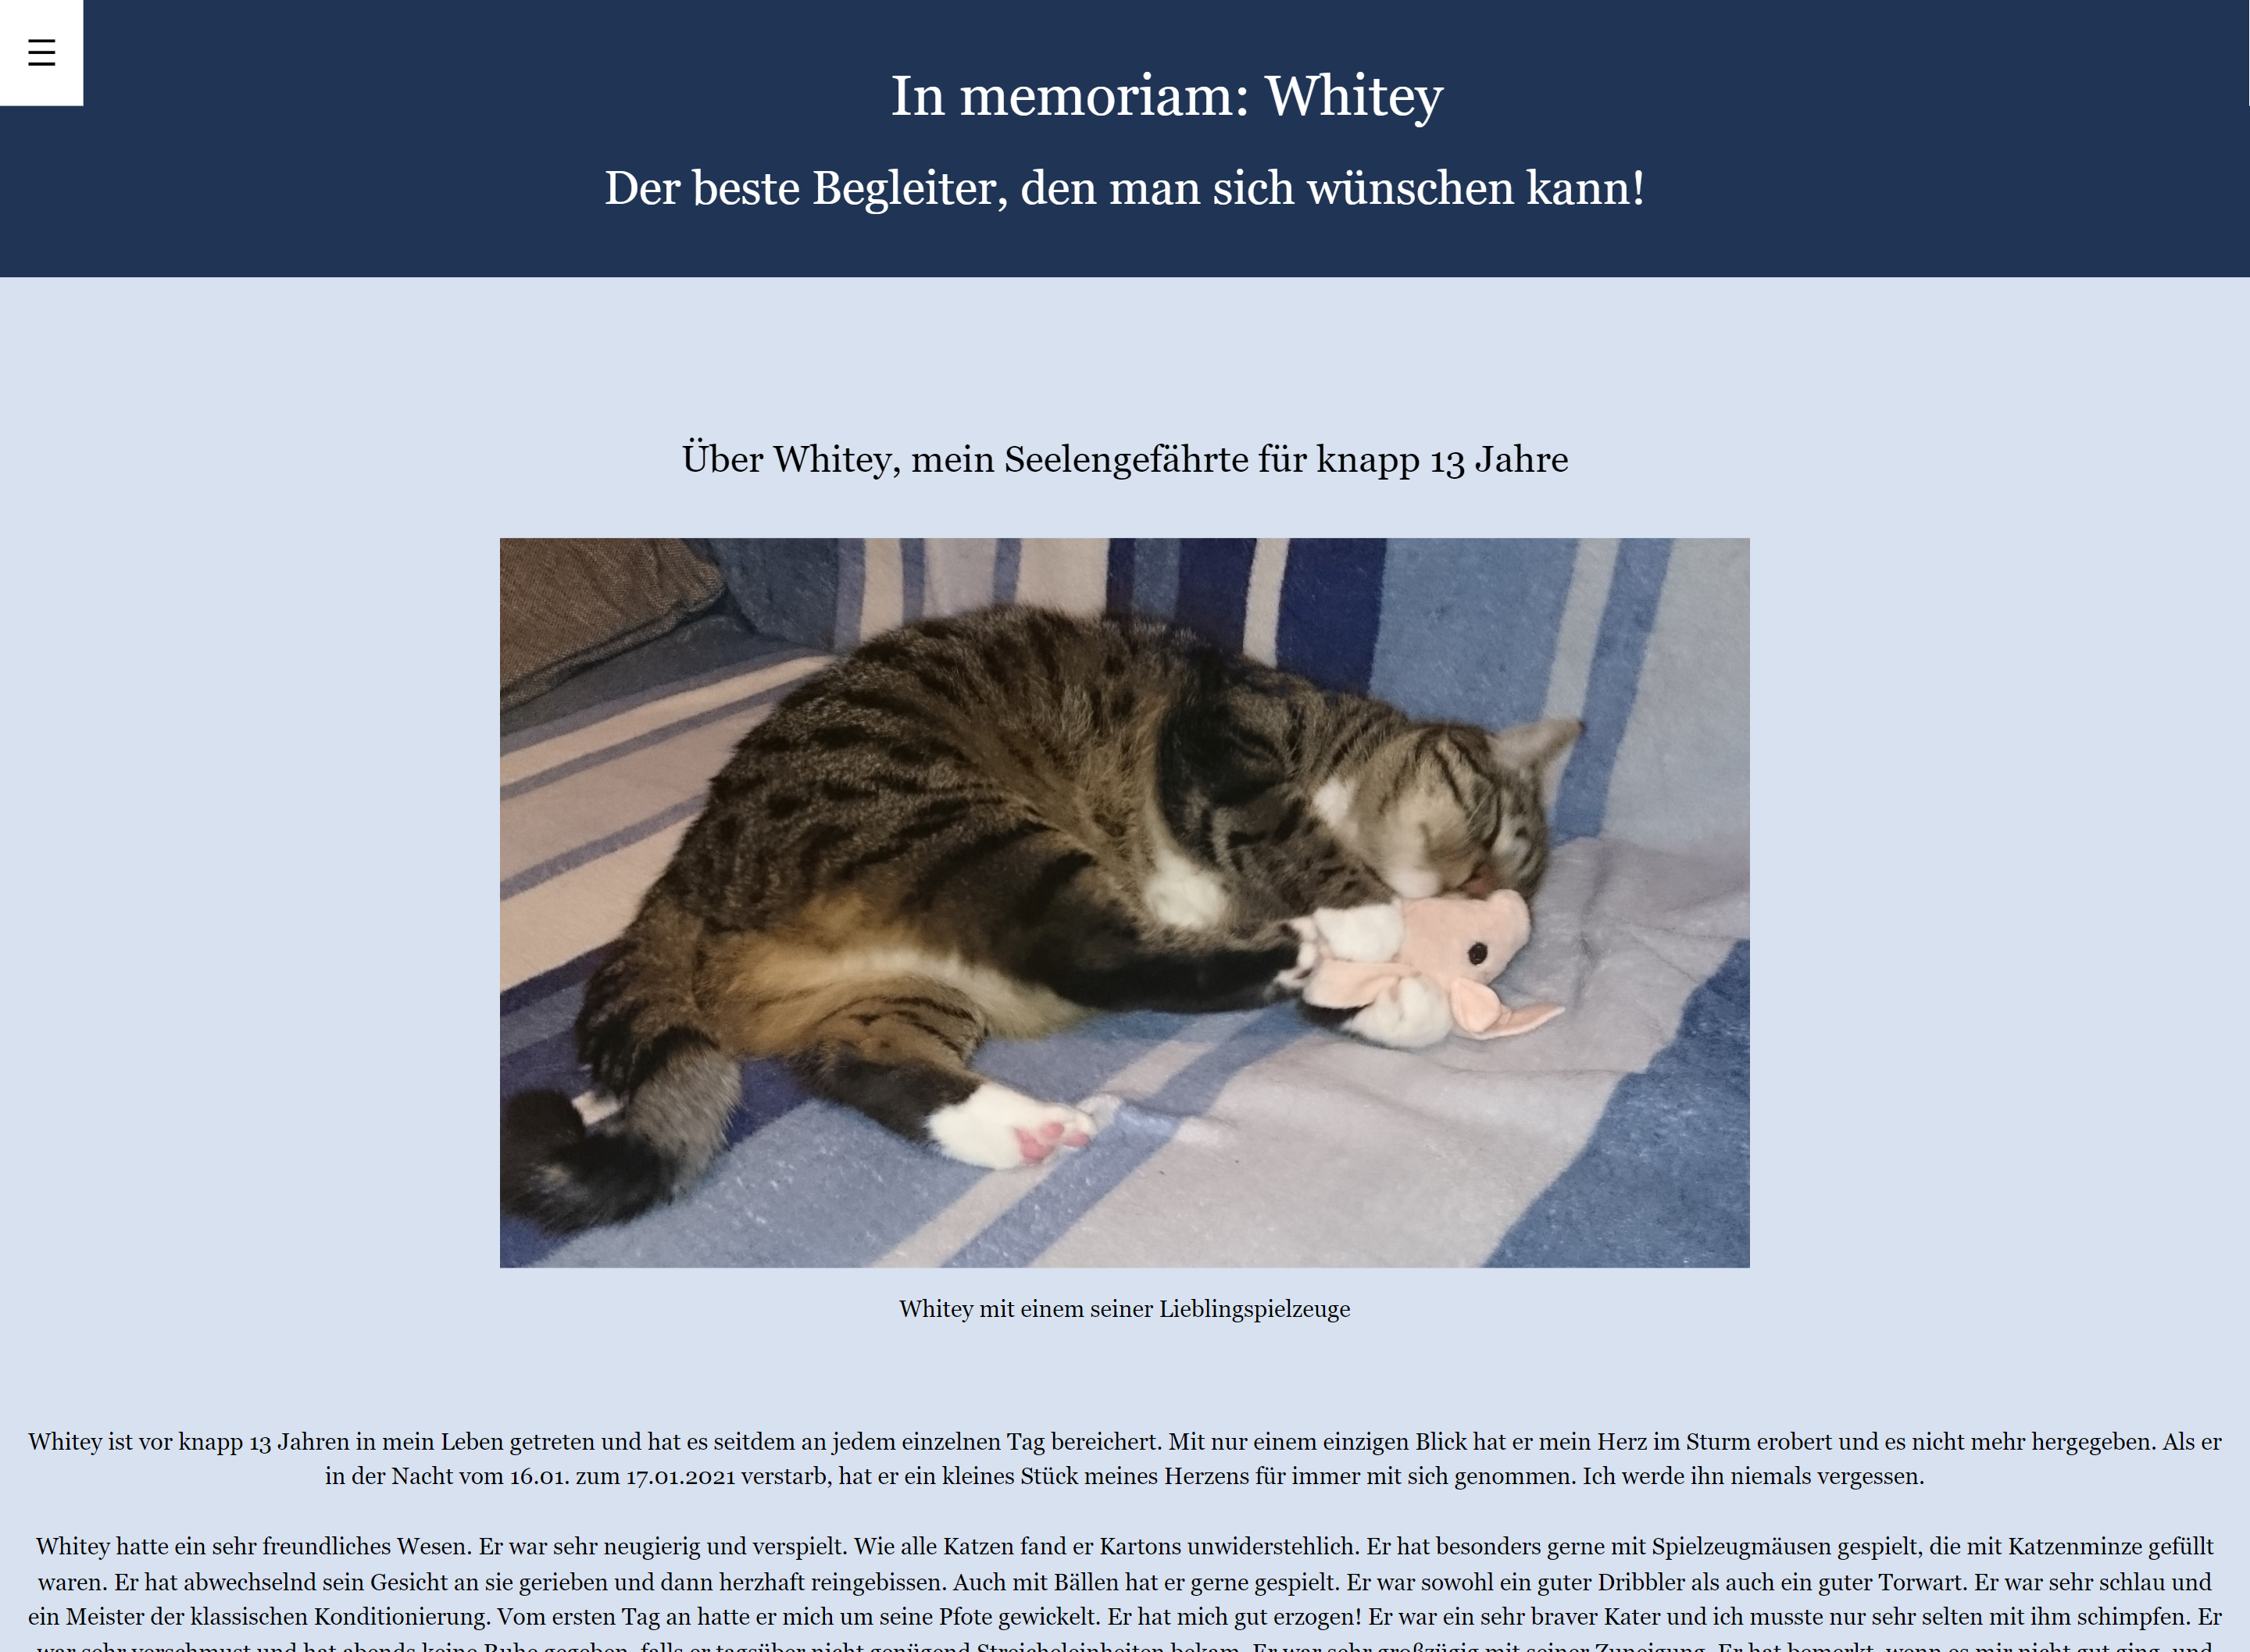 Screenshot for In memoriam Whitey showing a picture of a cat on a couch and text in German